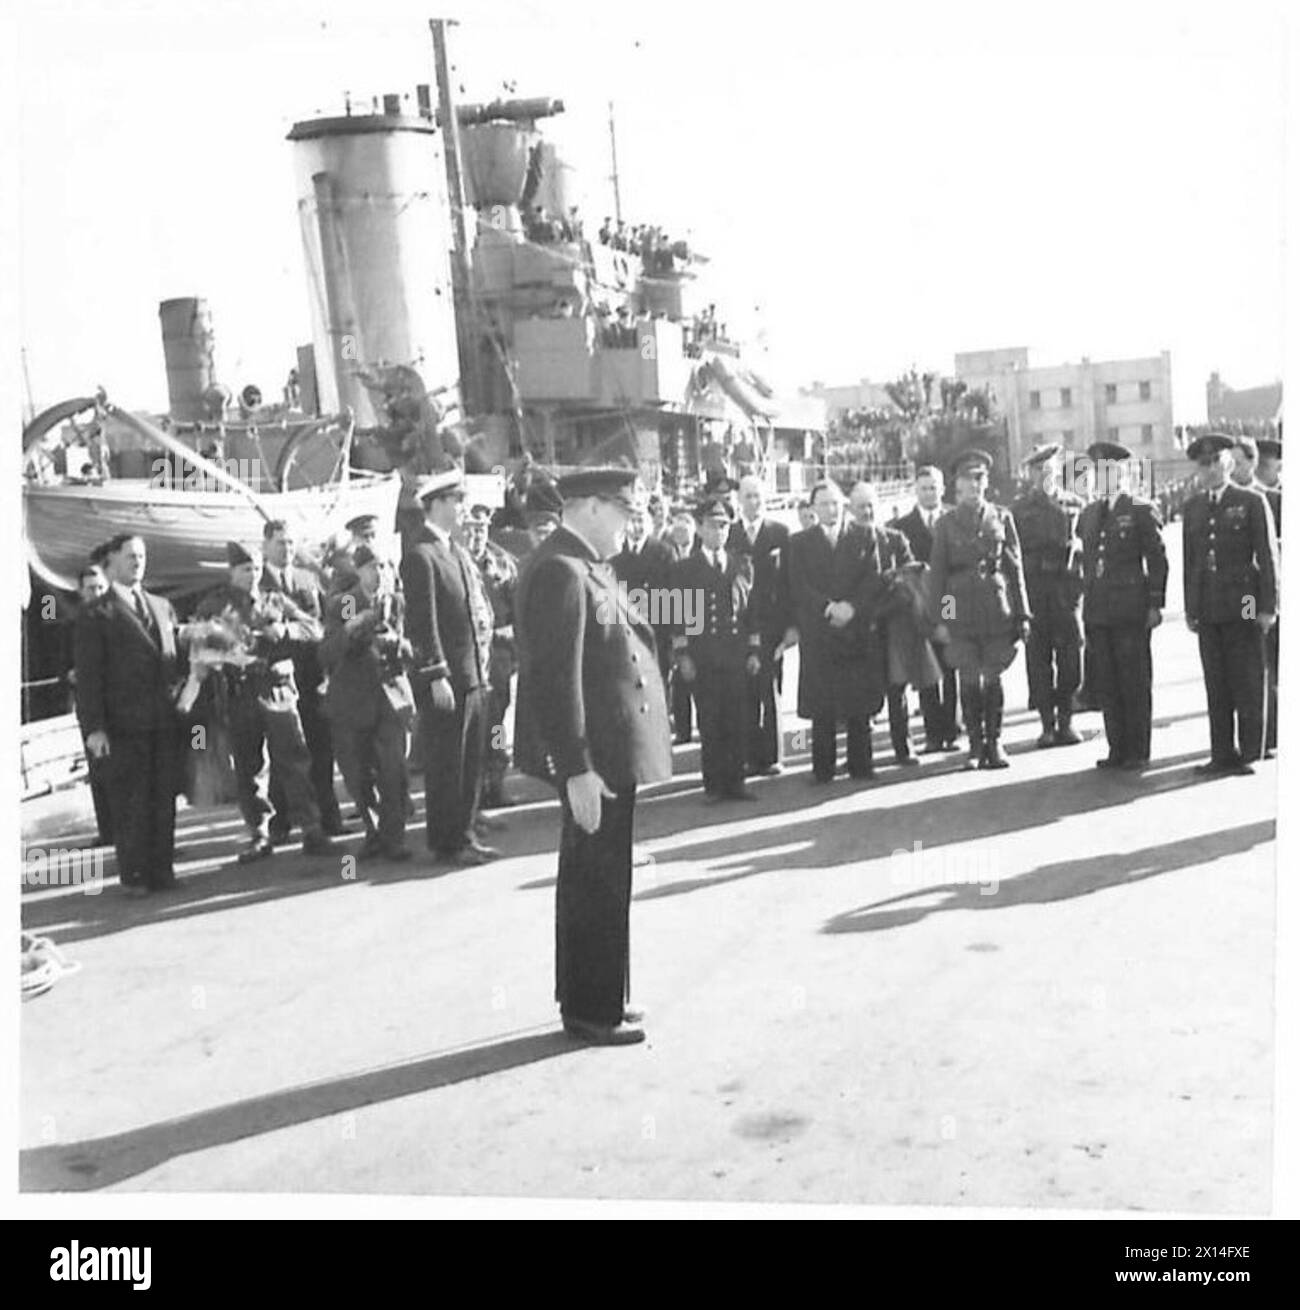 PRIME MINISTER IN ICELAND - The Prime Minister at Reykjavik. In the background are Ensign Franklyn D. Roosevelt jnr., Hermann Ronasson, Prime Minister of Iceland, General Sir John Dill (CIGS) and Air Chief Marshal Sir Wilfred Freeman (VCAS) British Army Stock Photo